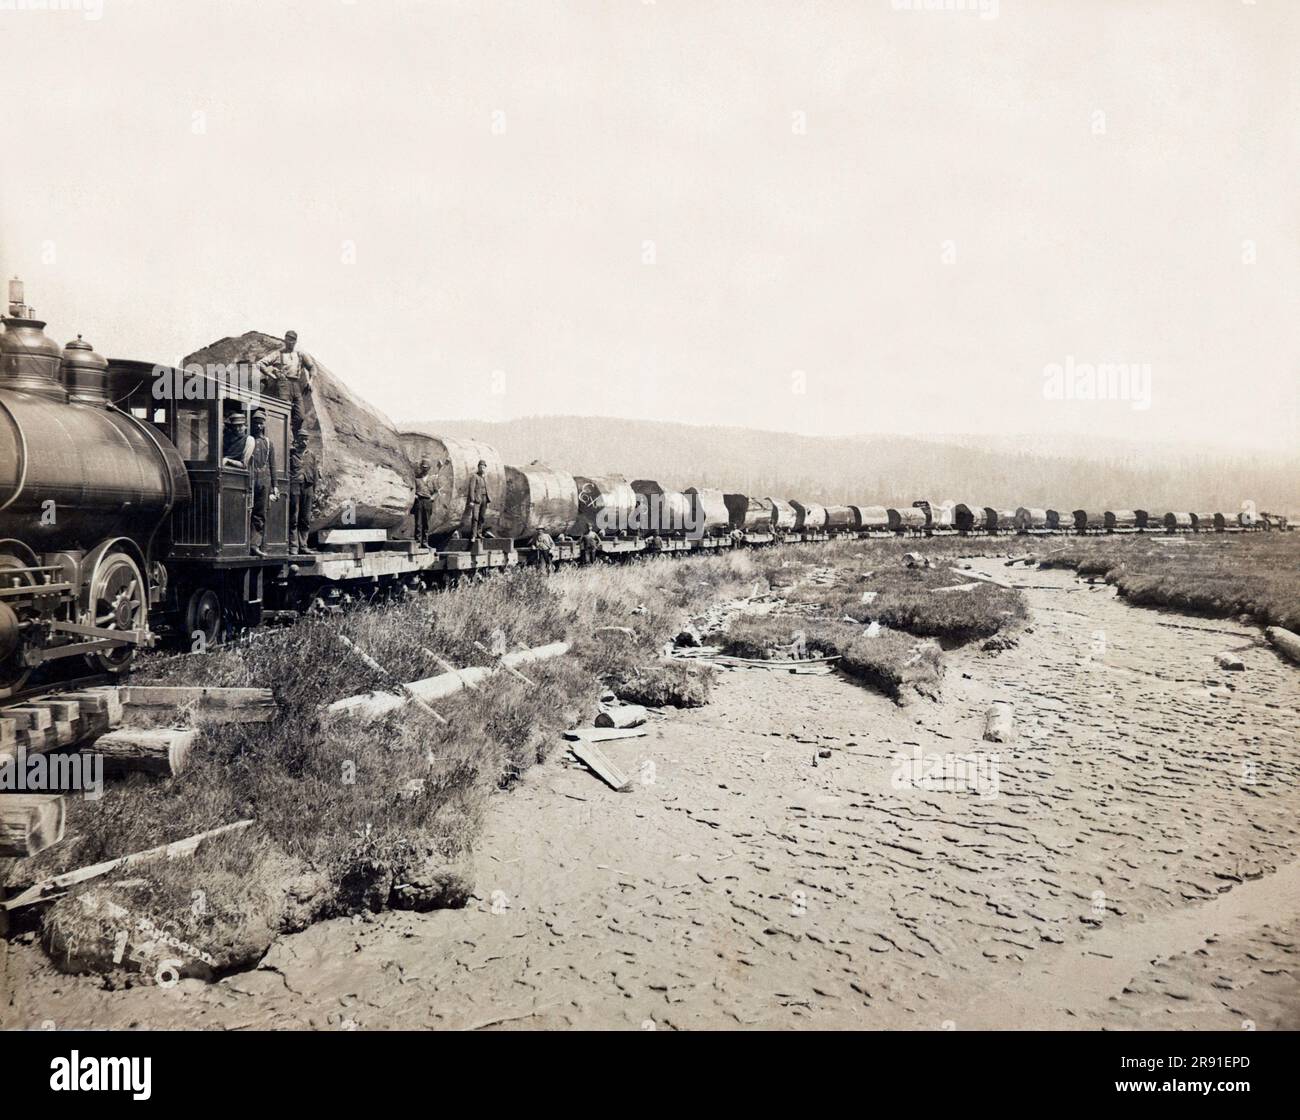 Freshwater, Caifornia:  c. 1900 A  Excelsior Redwood Company logging train in Humboldt County with each car carrying a single log on its way to the mill. Photograph is by August William Ericson. Stock Photo